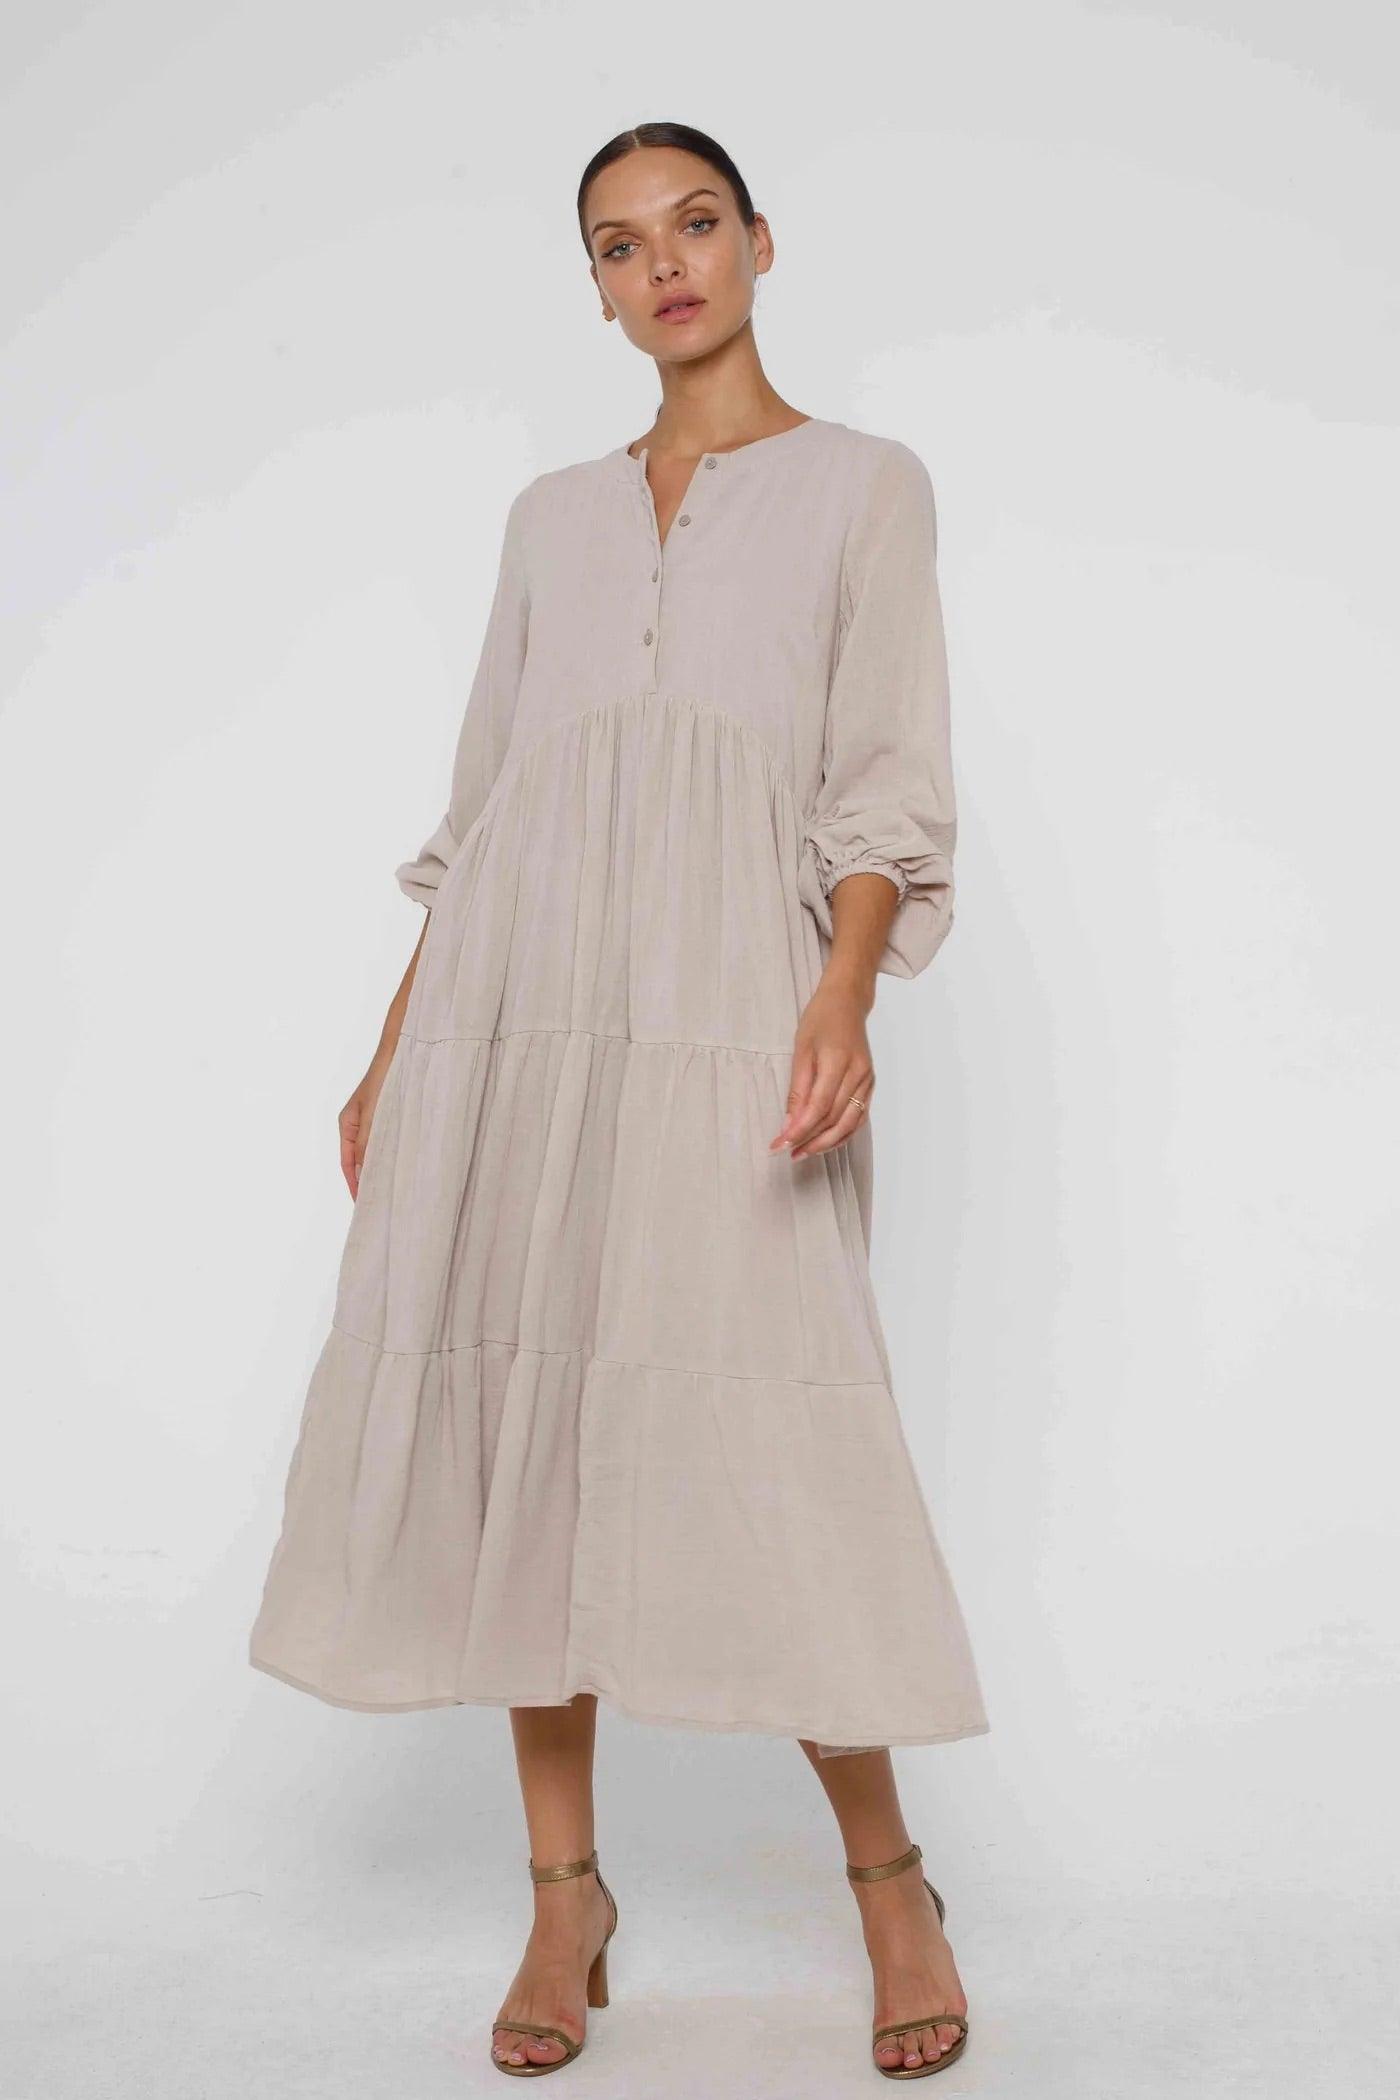 Outline Clothing just adores The Harlow Dress from BLAK LUXE. Its such a stunning design and colour for this season.  This long sleeve cotton tiered midi dress is a BLAK fan favourite - the silhouette is so feminine and easy to wear, with a buttoned bodice to wear it your way. 